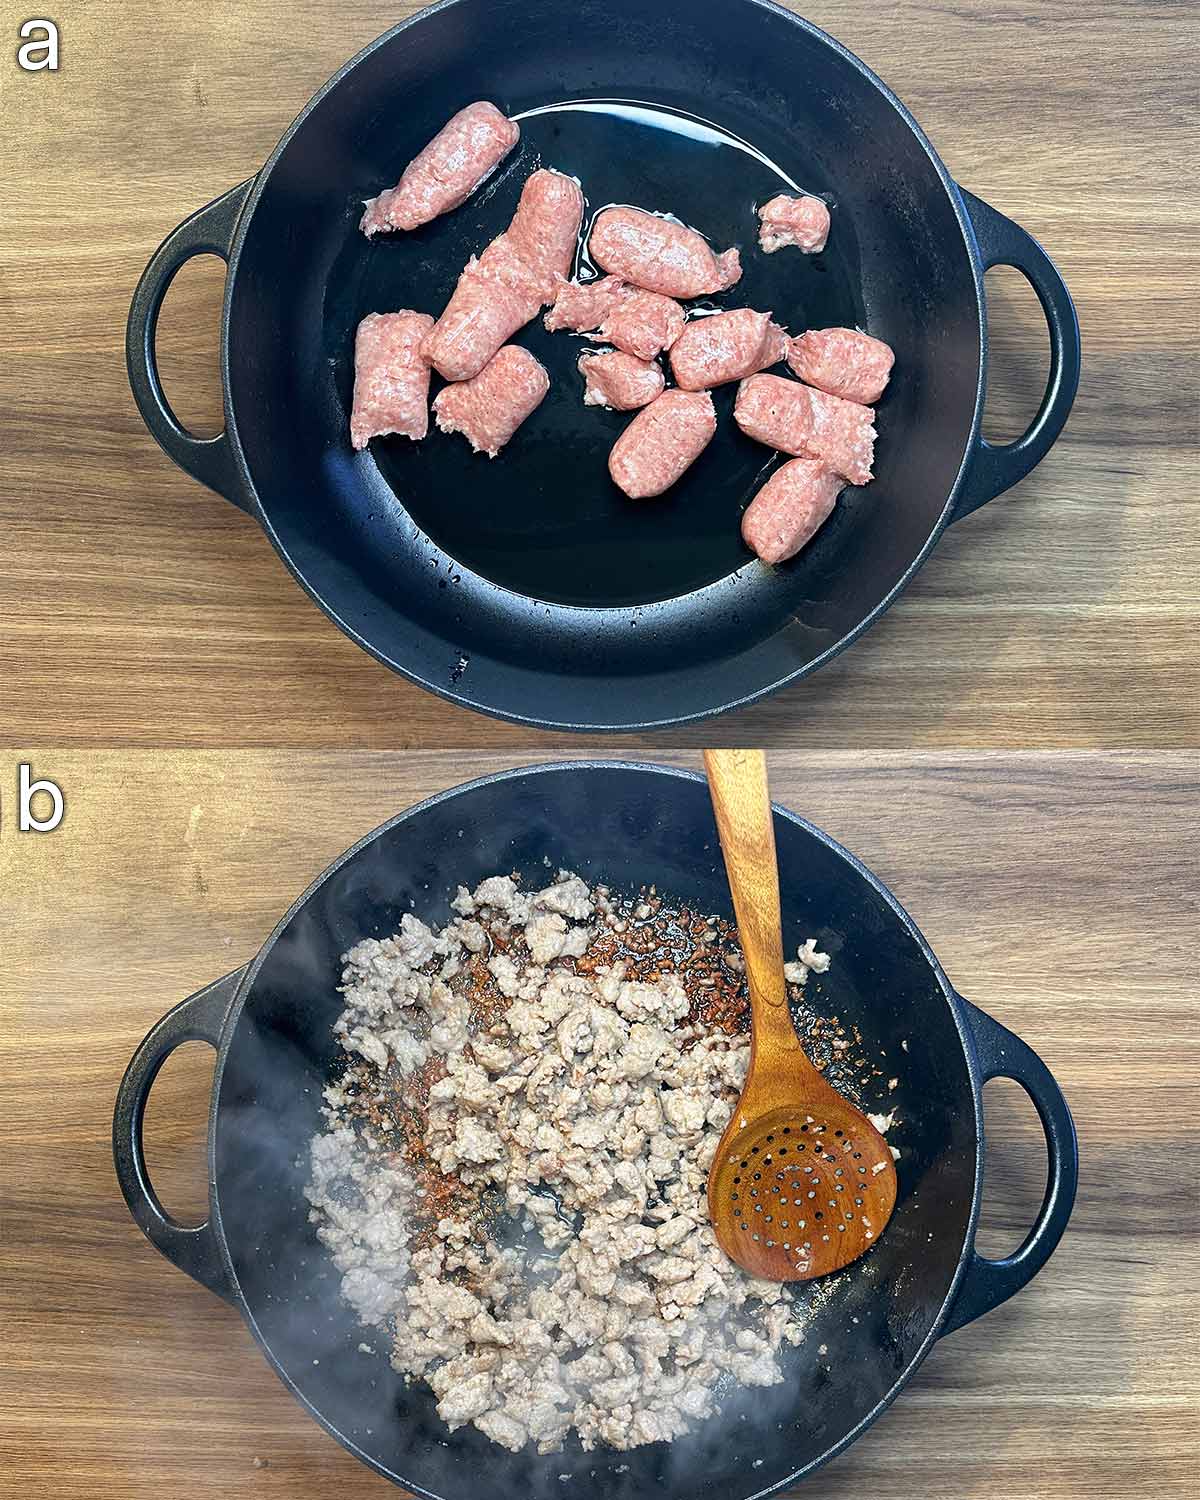 Two shot collage of sausage meat in a pan, before and after cooking.